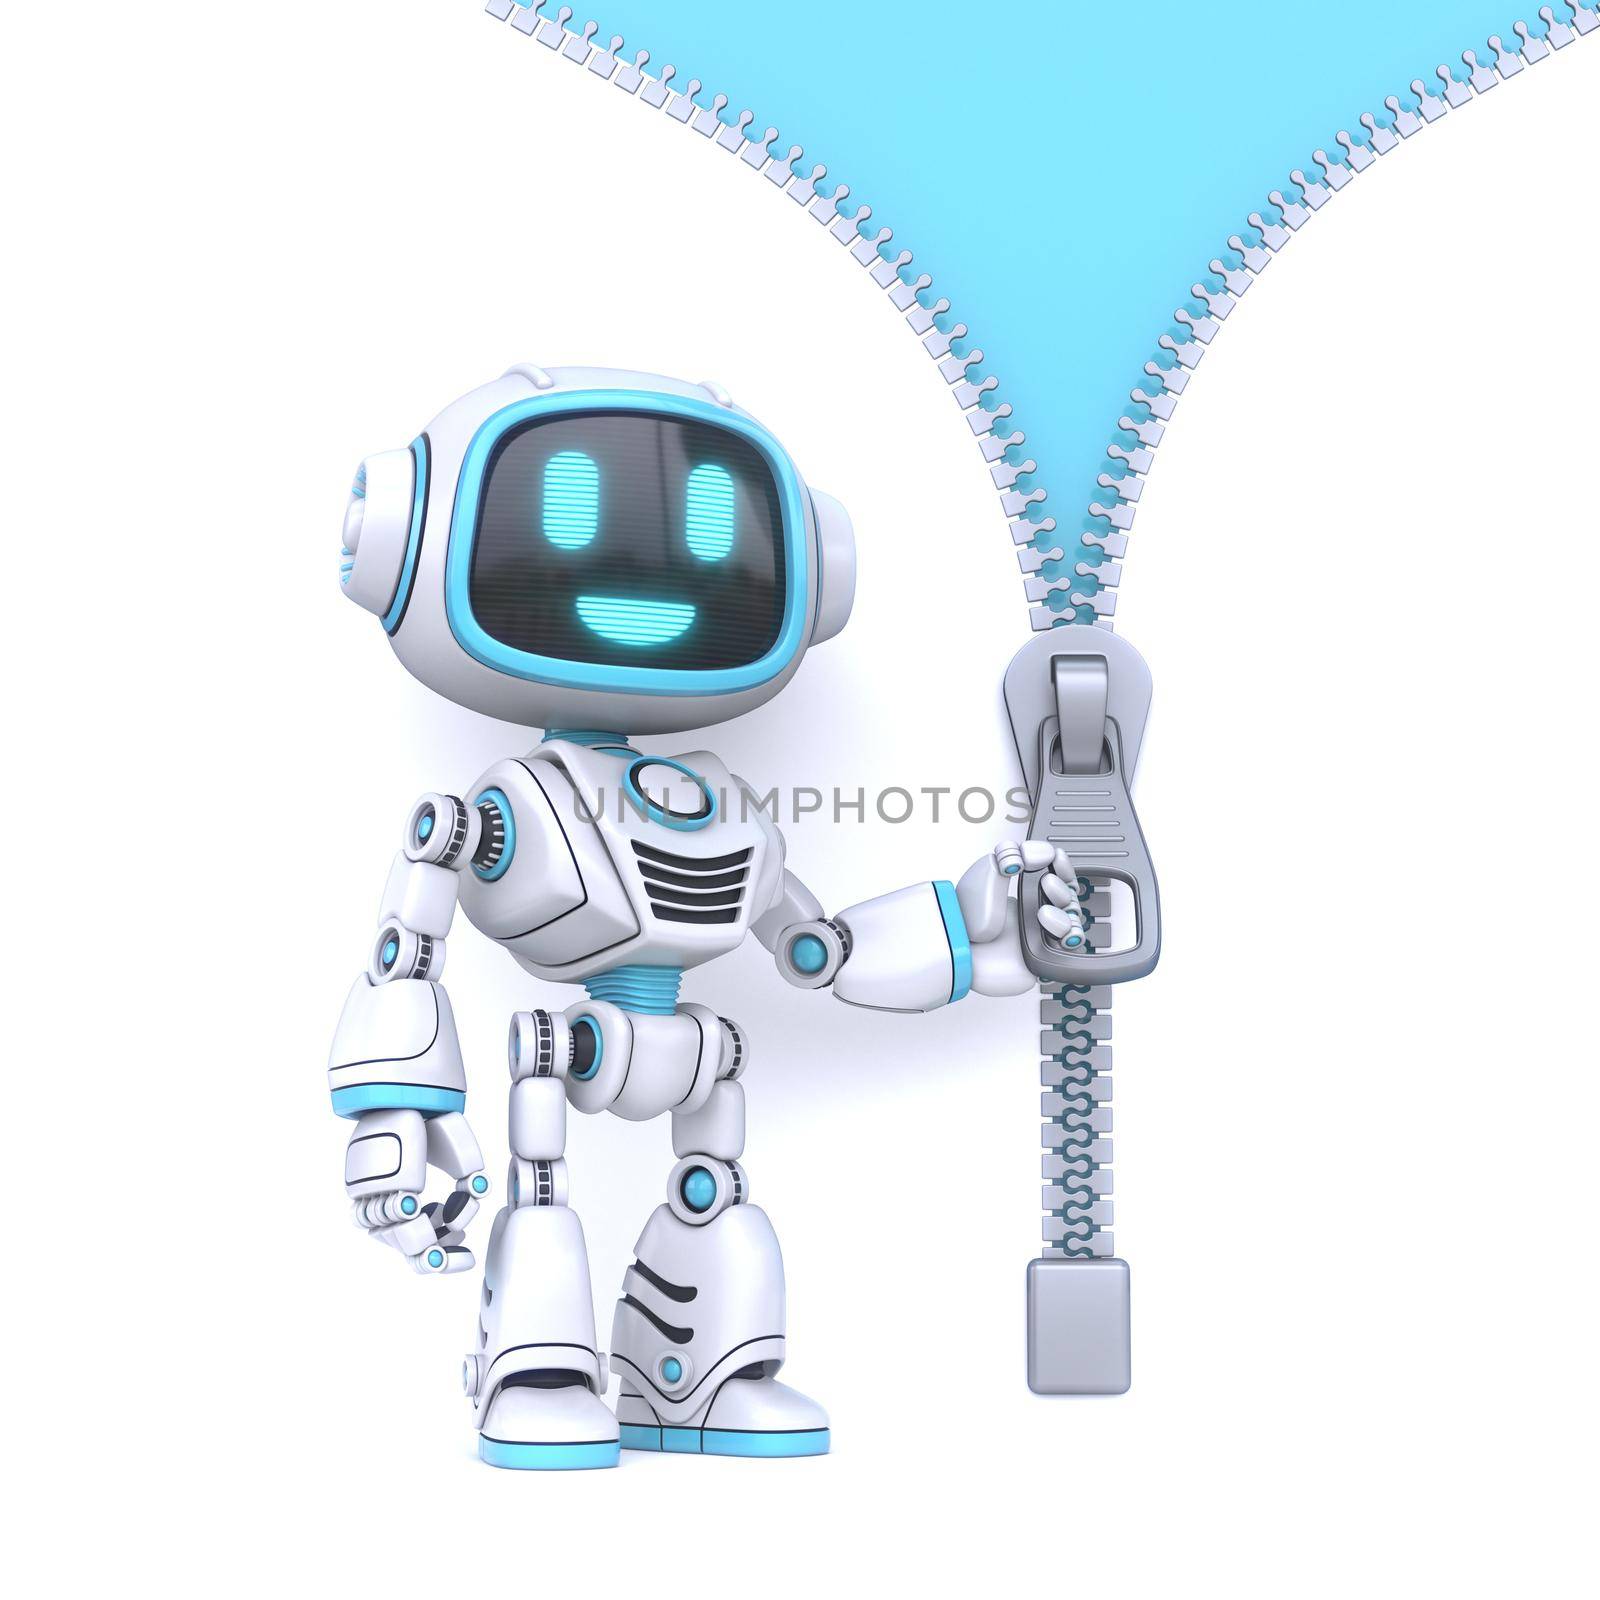 Cute blue robot open zipper background 3D rendering illustration isolated on white background